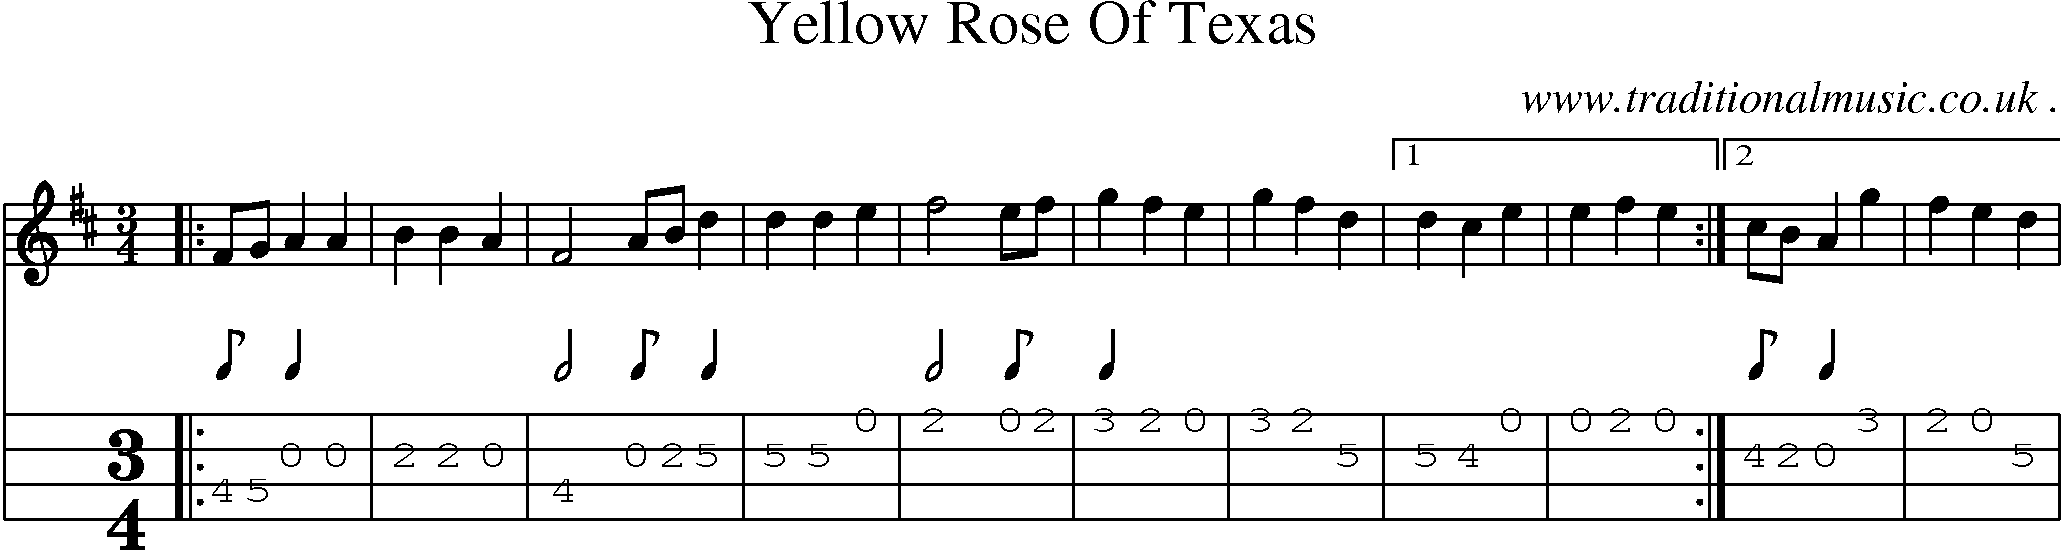 Music Score and Mandolin Tabs for Yellow Rose Of Texas